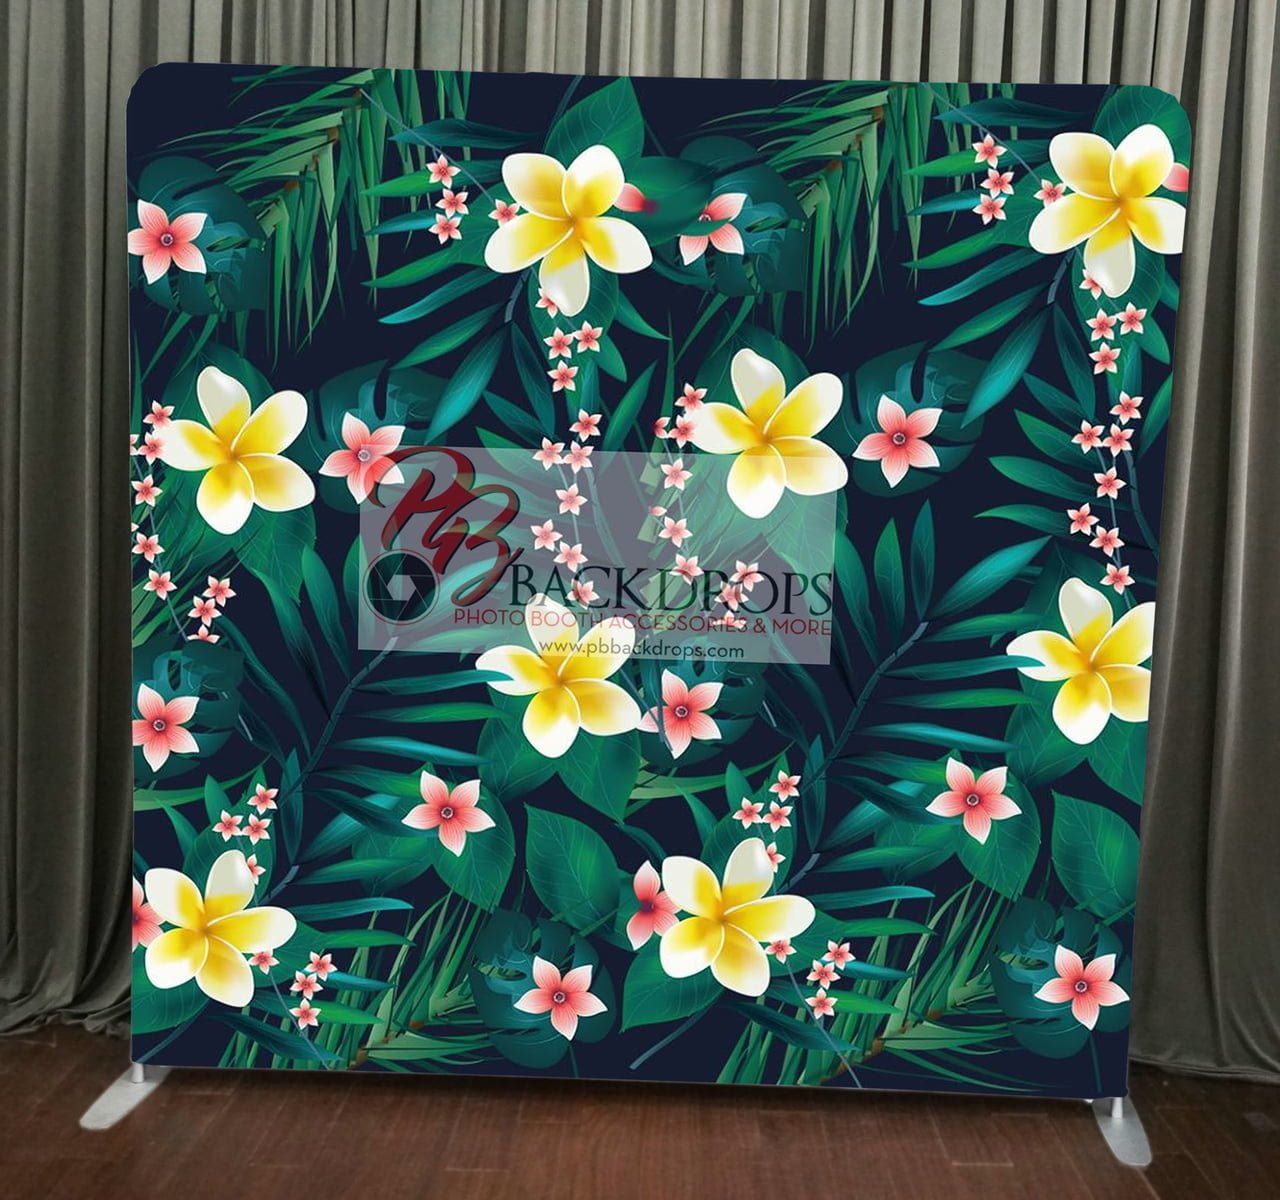 A photo backdrop with tropical flowers on it.